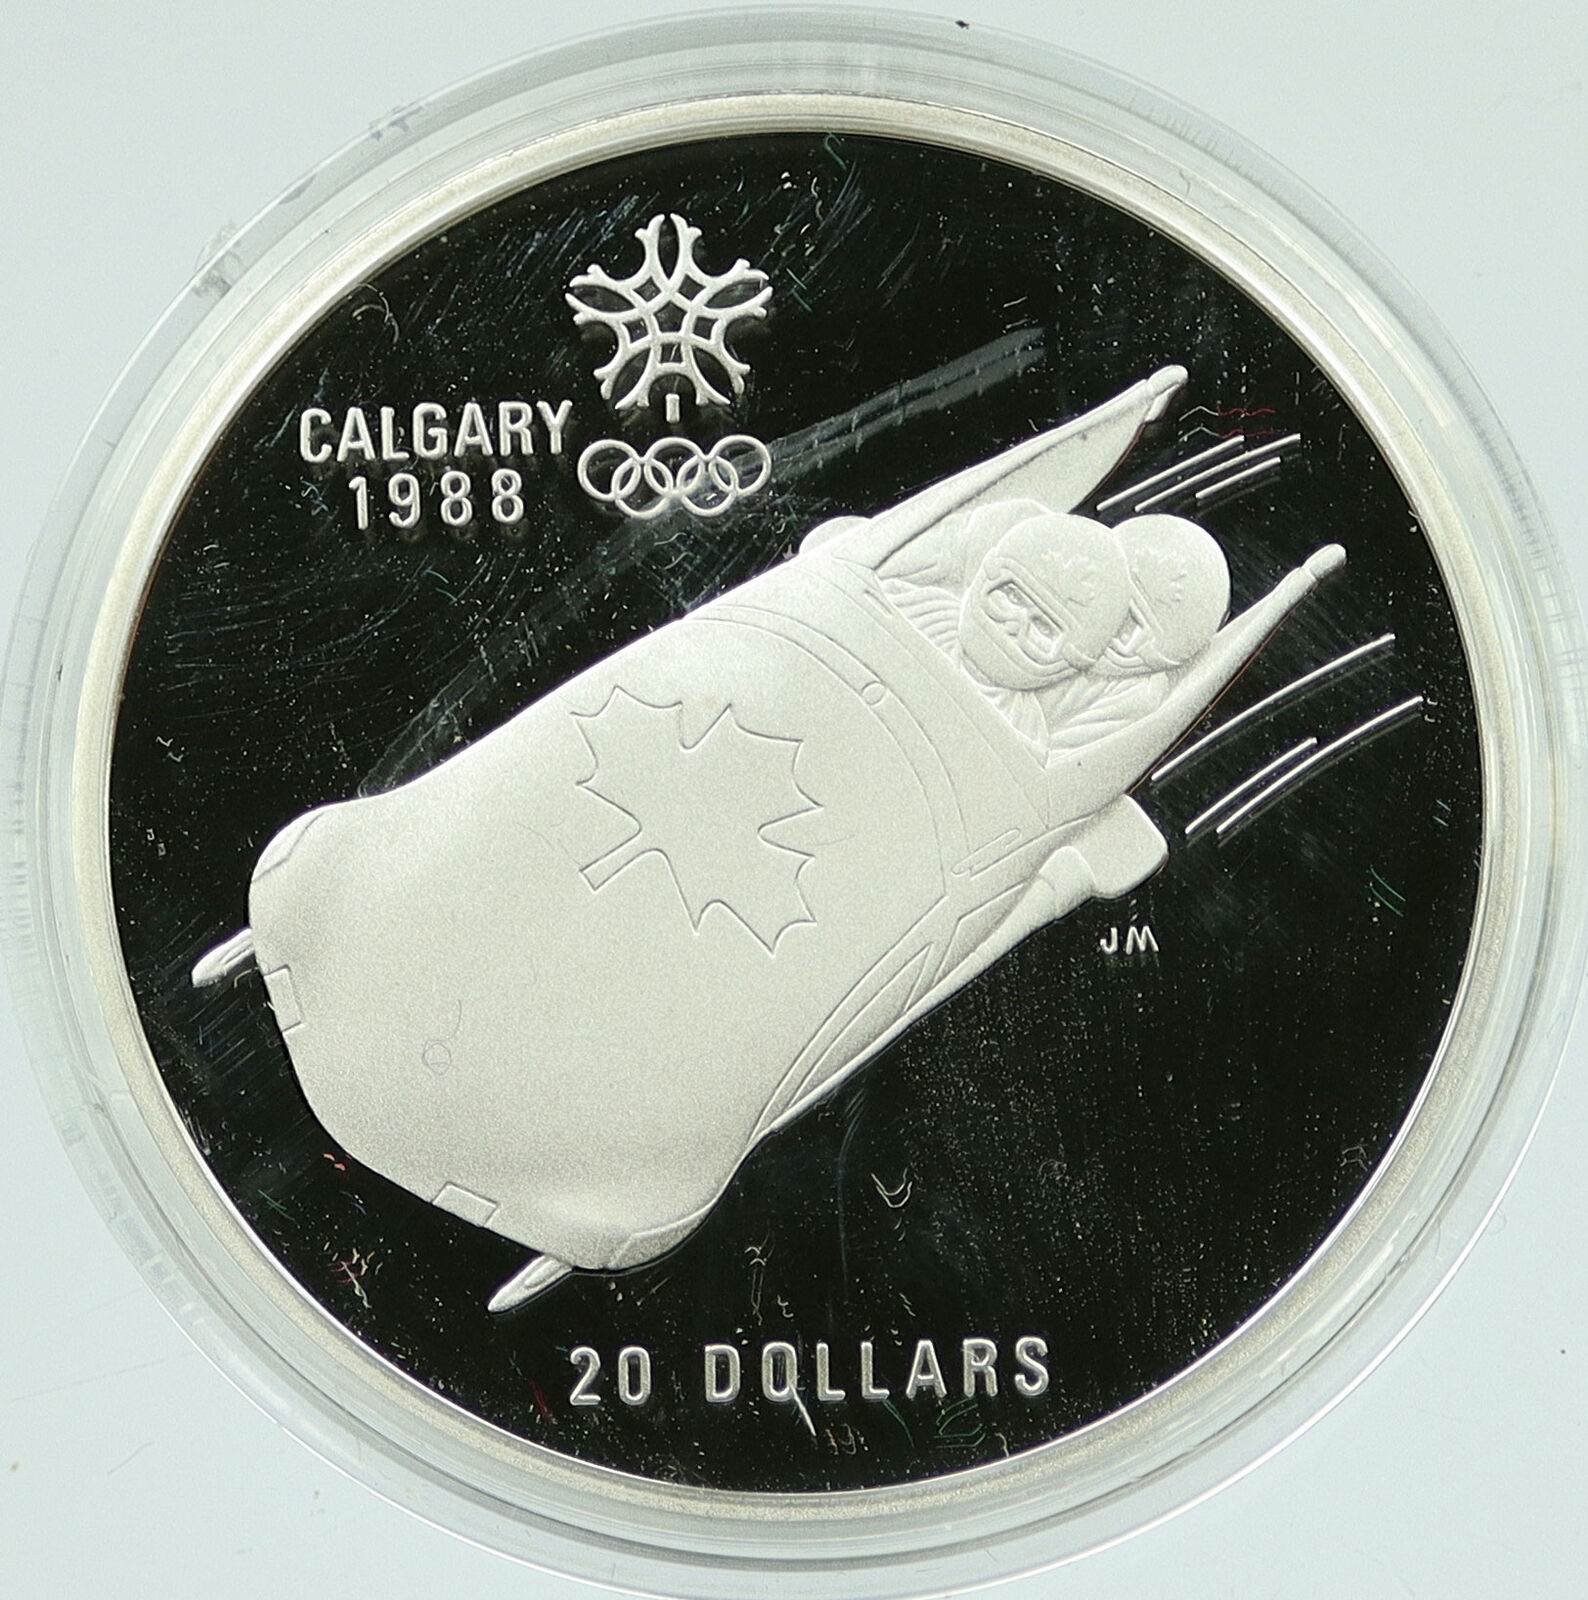 1987 CANADA 1988 CALGARY OLYMPICS Bobsled LUGE Old Proof Silver $20 Coin i117256